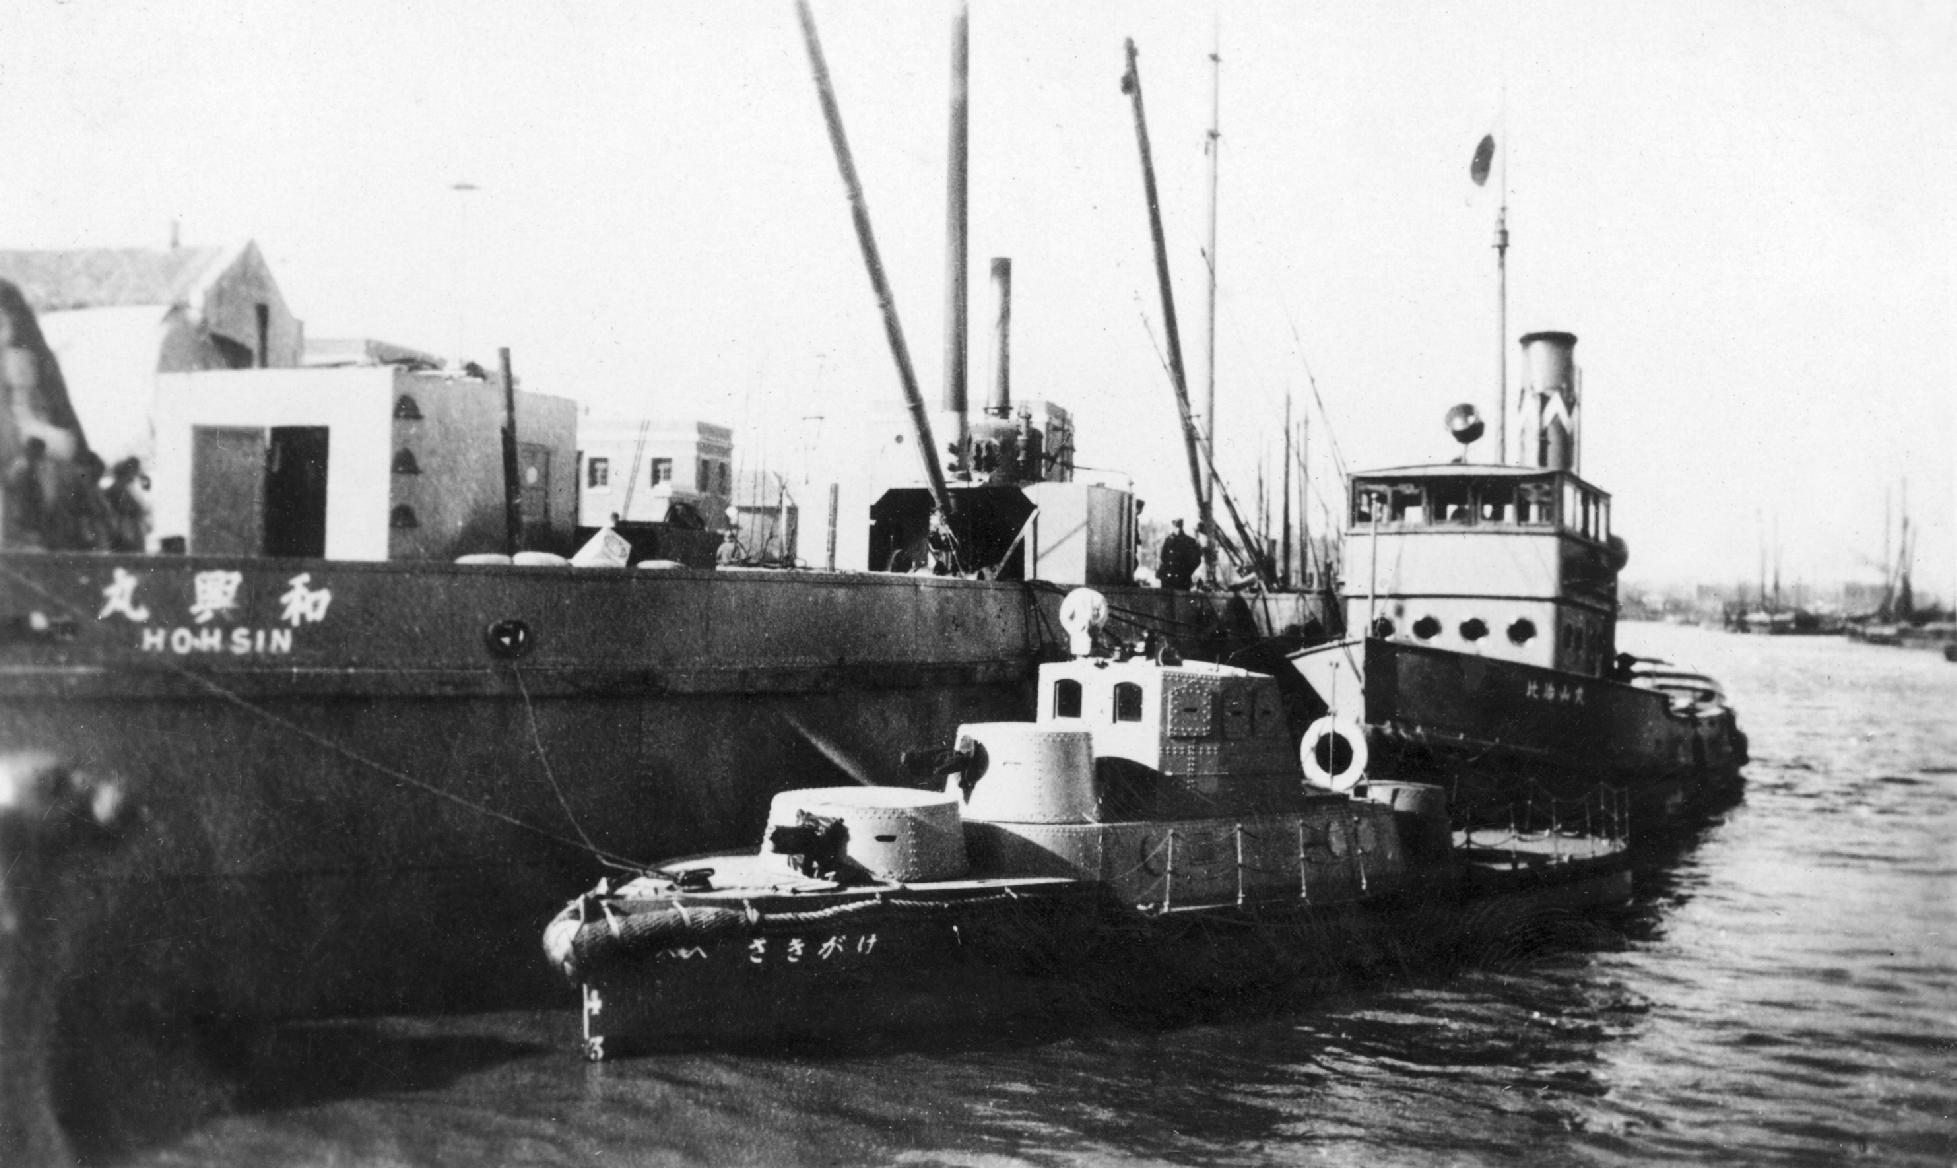 Japanese gunboat named Hoh Sin (He Xing) 和興 docked at Tianjin 天津.